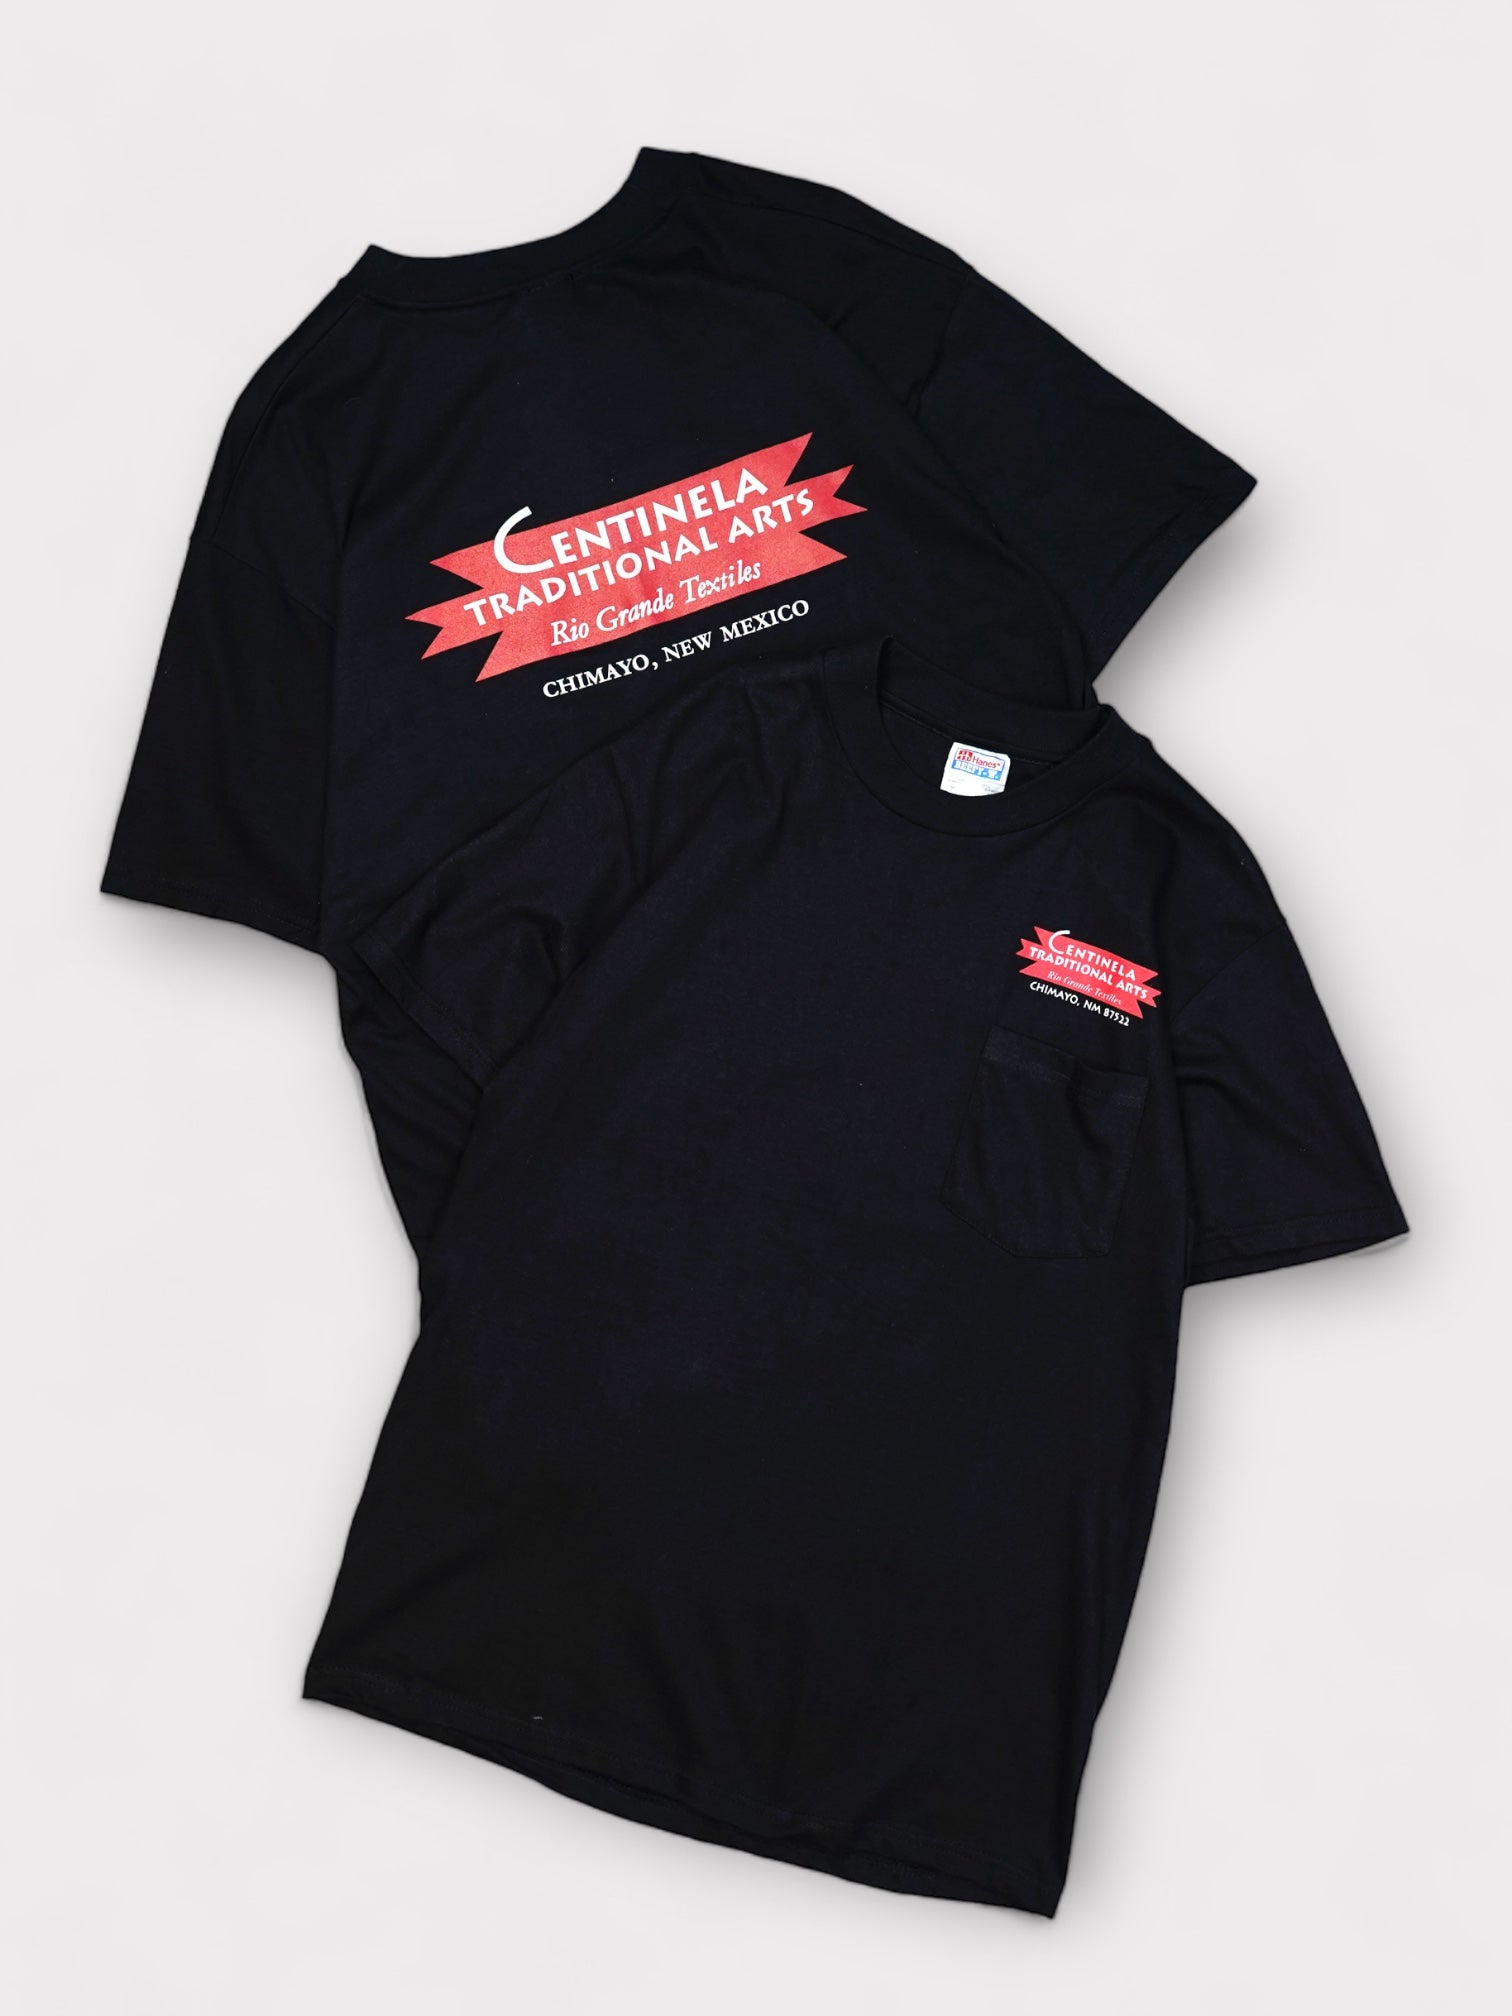 Deadstock CENTINELA Back print Pocket tee made in Mexico Centinela souvenir pocket T-shirt